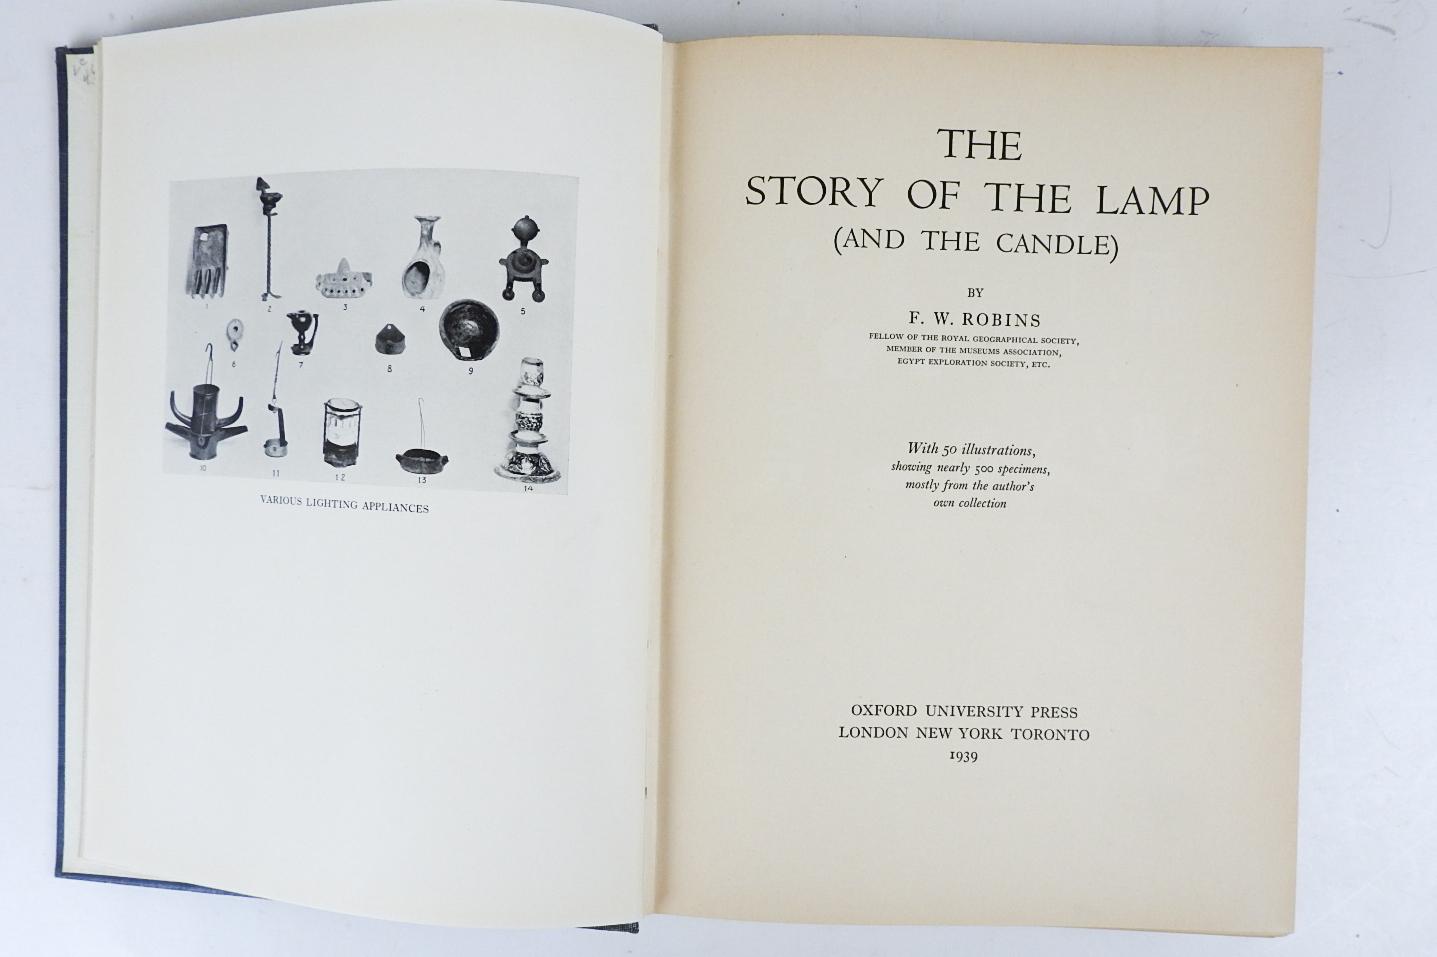 The Story Of The Lamp and the Candle by F. W. Robins.  Published by Oxford University Press, London, 1939.  Blue cloth binding, many black and white illustrations, shelf wear, exlib, age toning, spine fading.